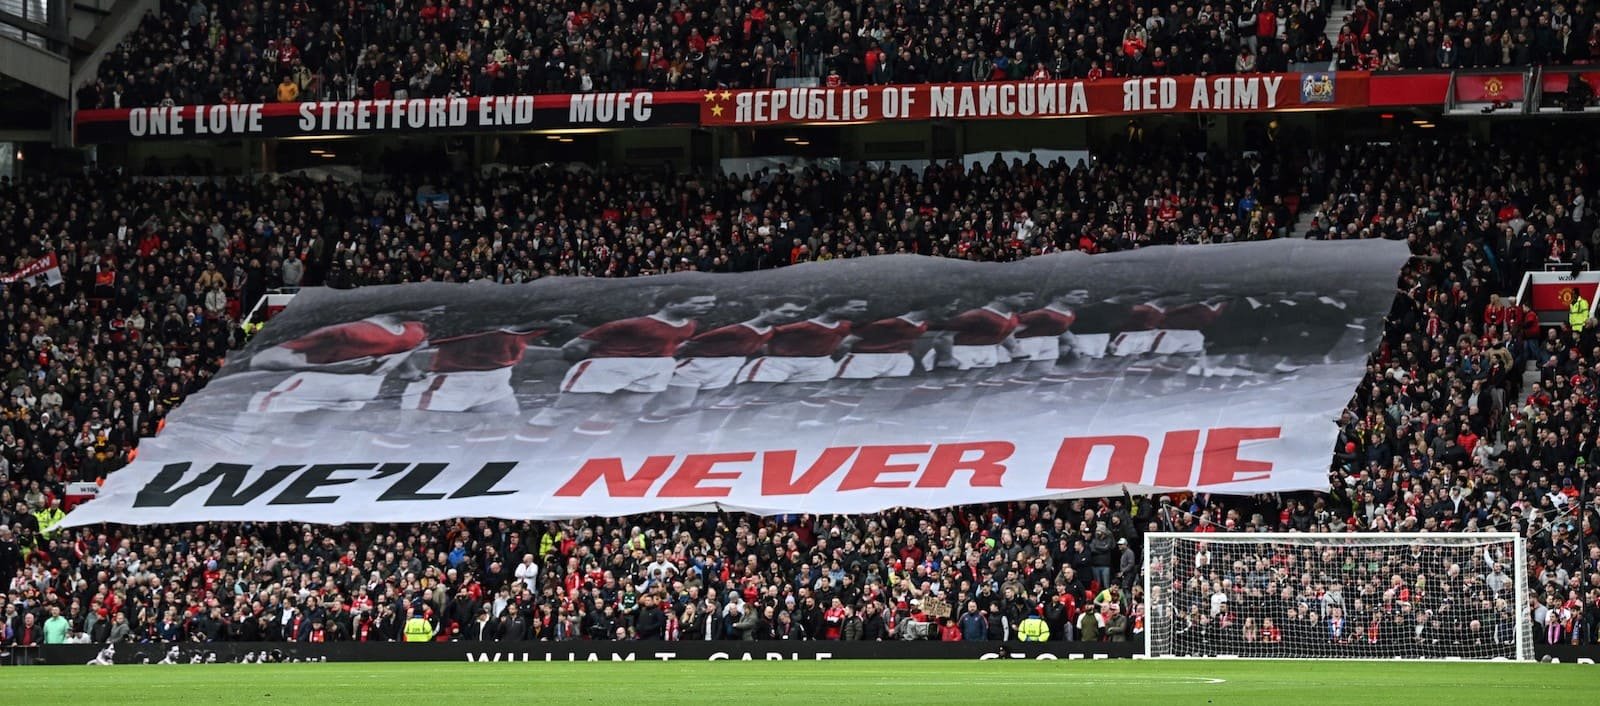 Manchester United agree to scrap changes to season ticket renewal policy after discussion with fans - Man United News And Transfer News